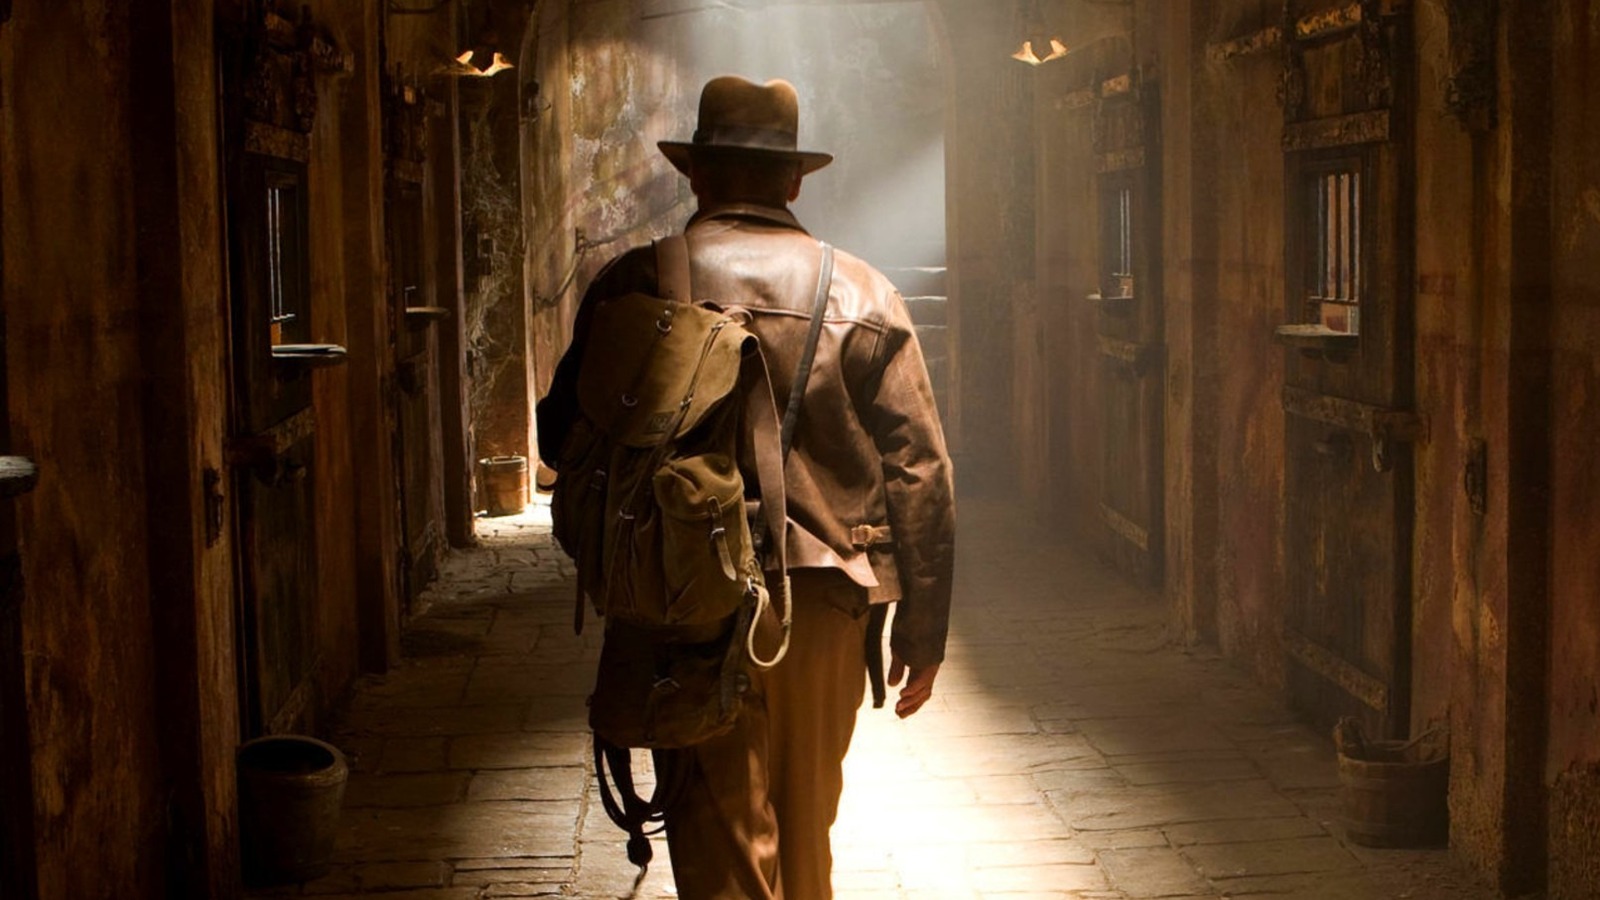 Harrison Ford Says Indy Is "At the End of His Journey" in Indiana Jones 5